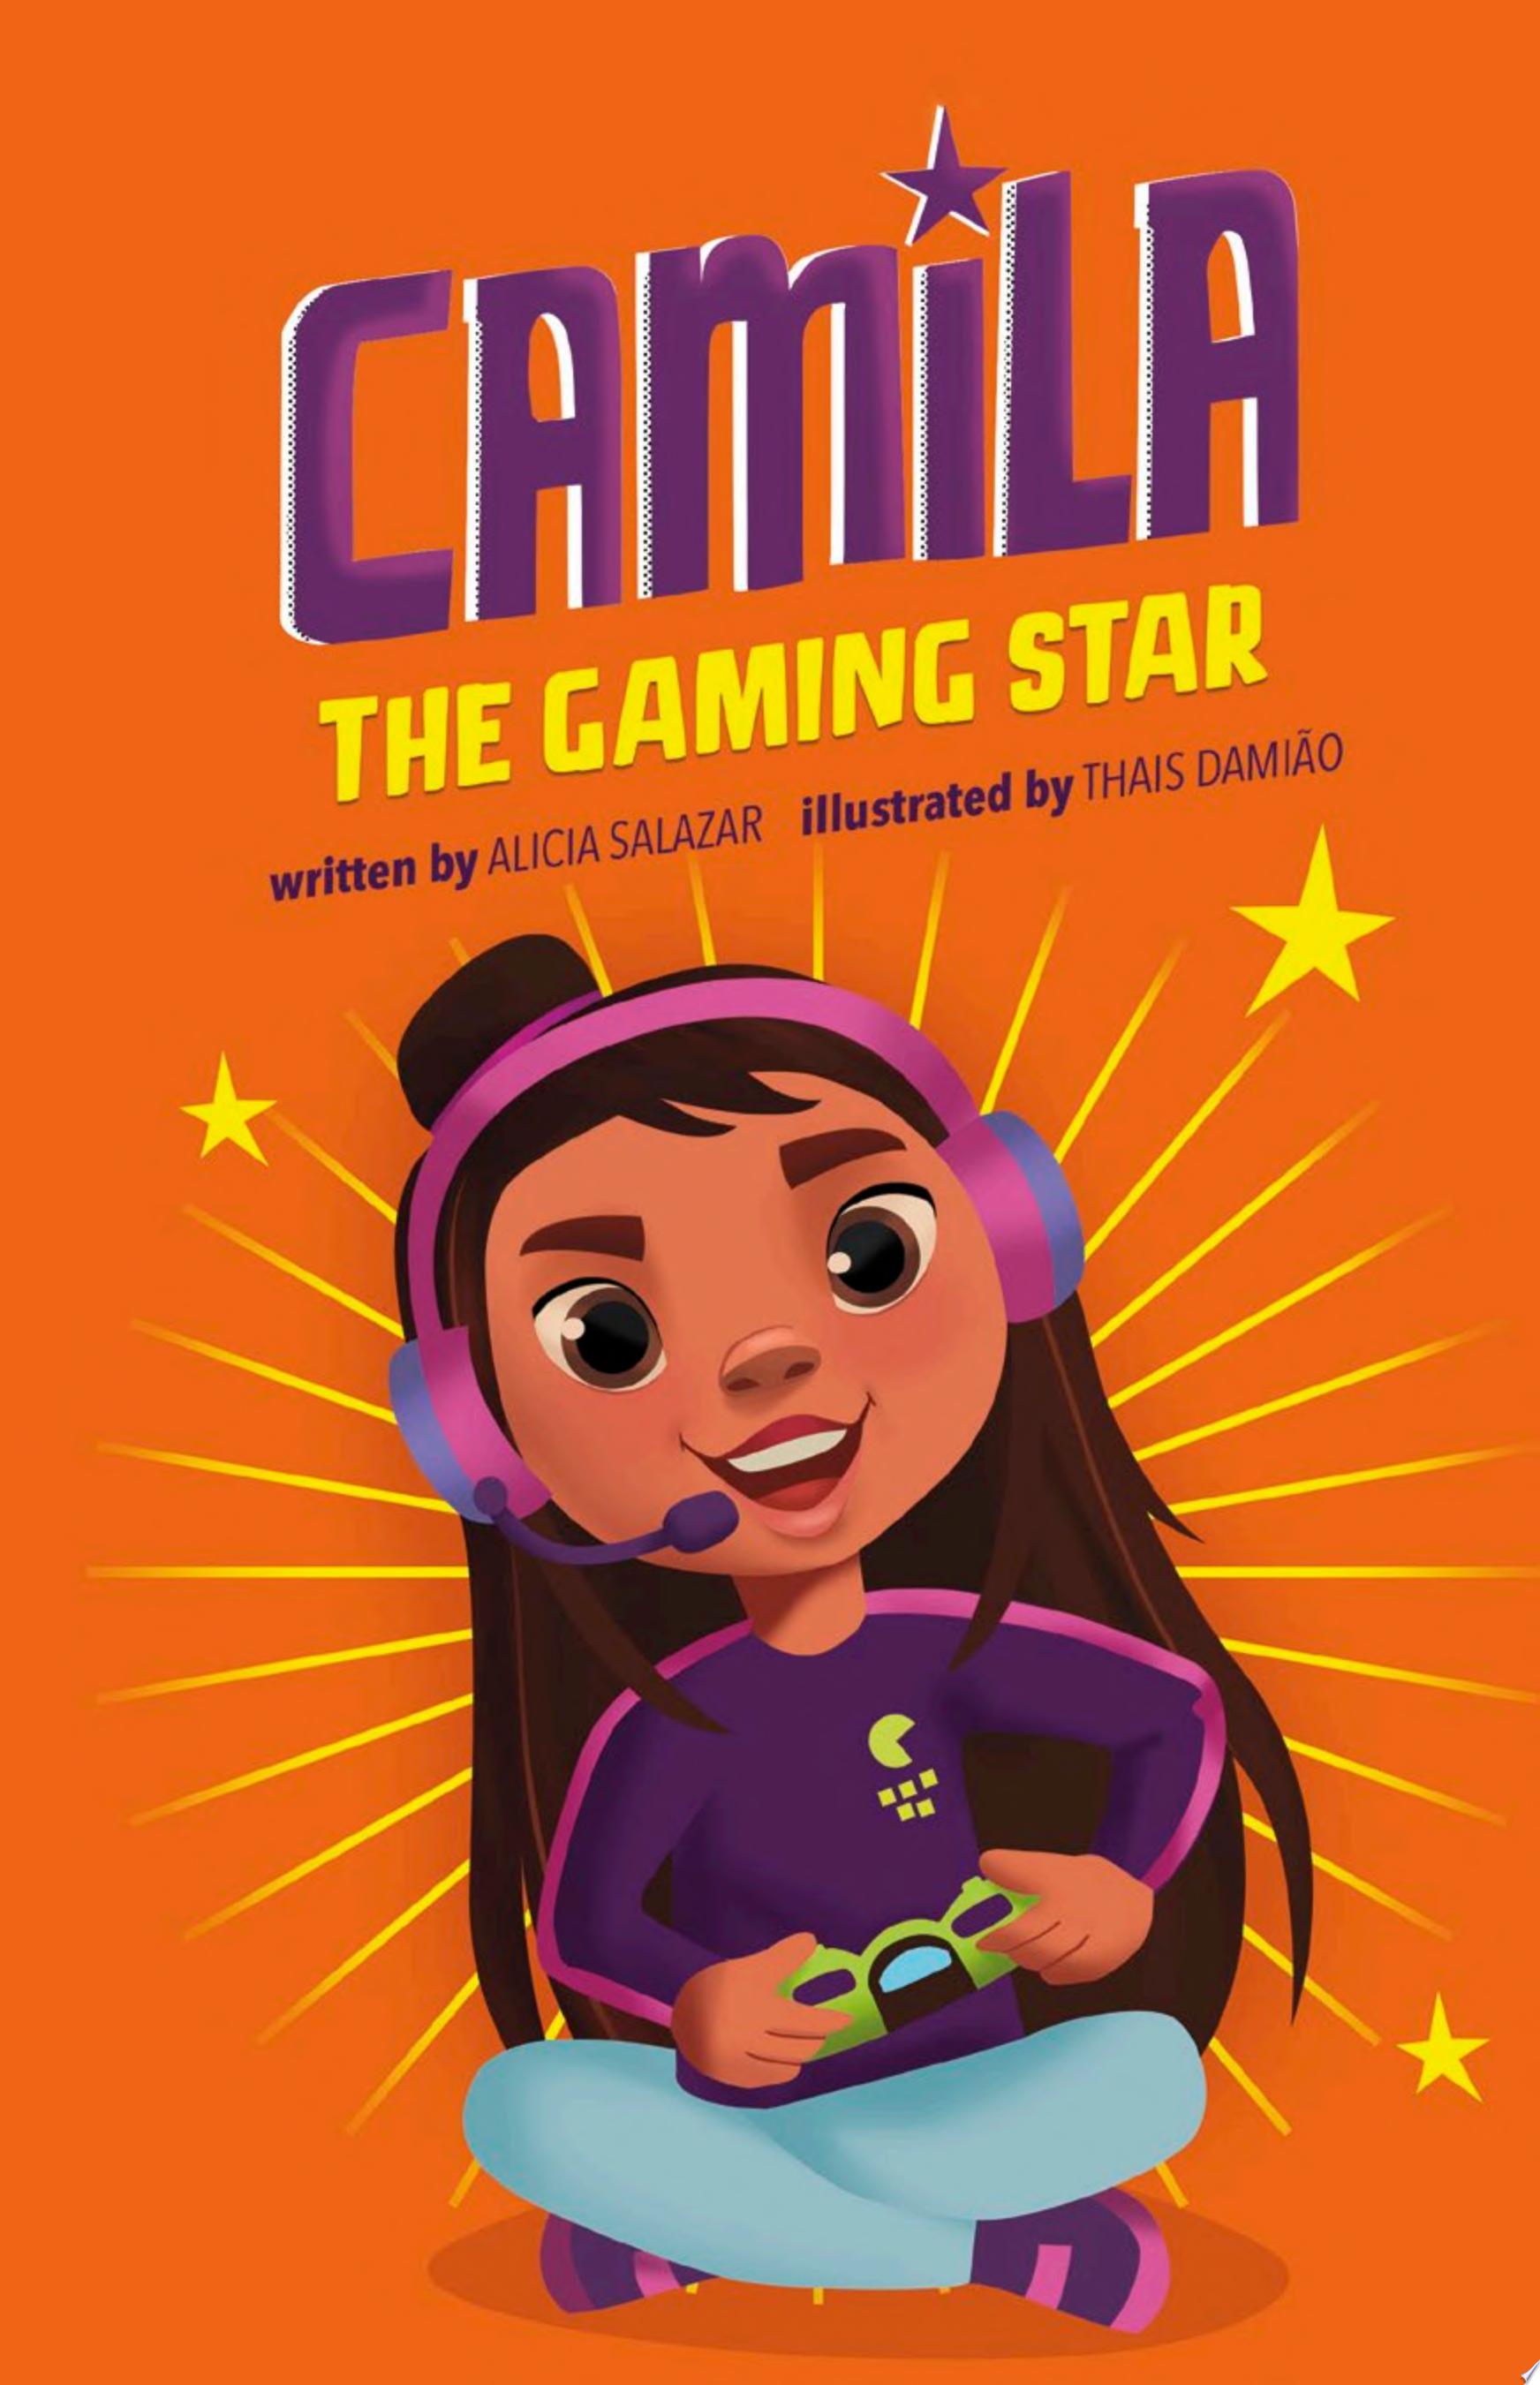 Image for "Camila the Gaming Star"